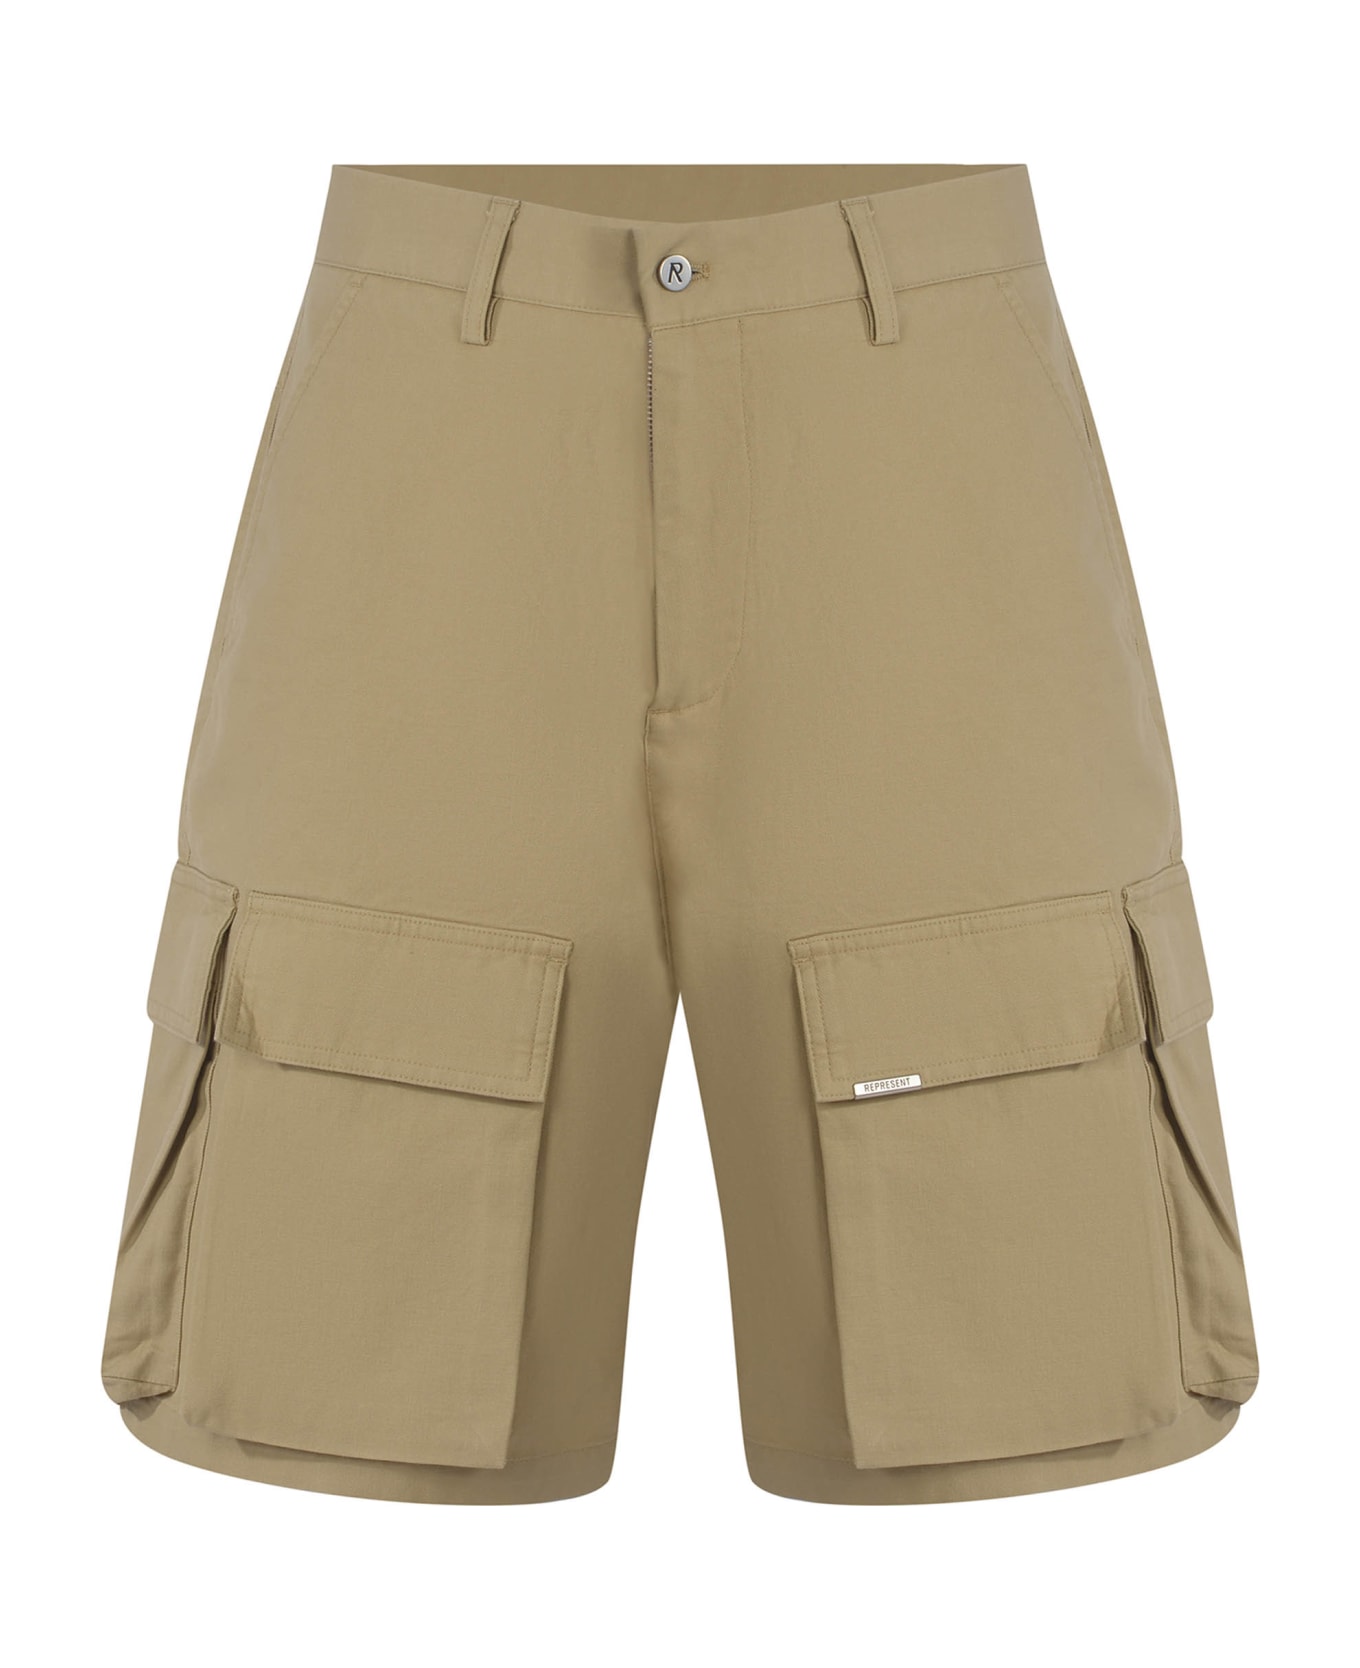 REPRESENT Shorts Represent Made Of Cotton - Beige